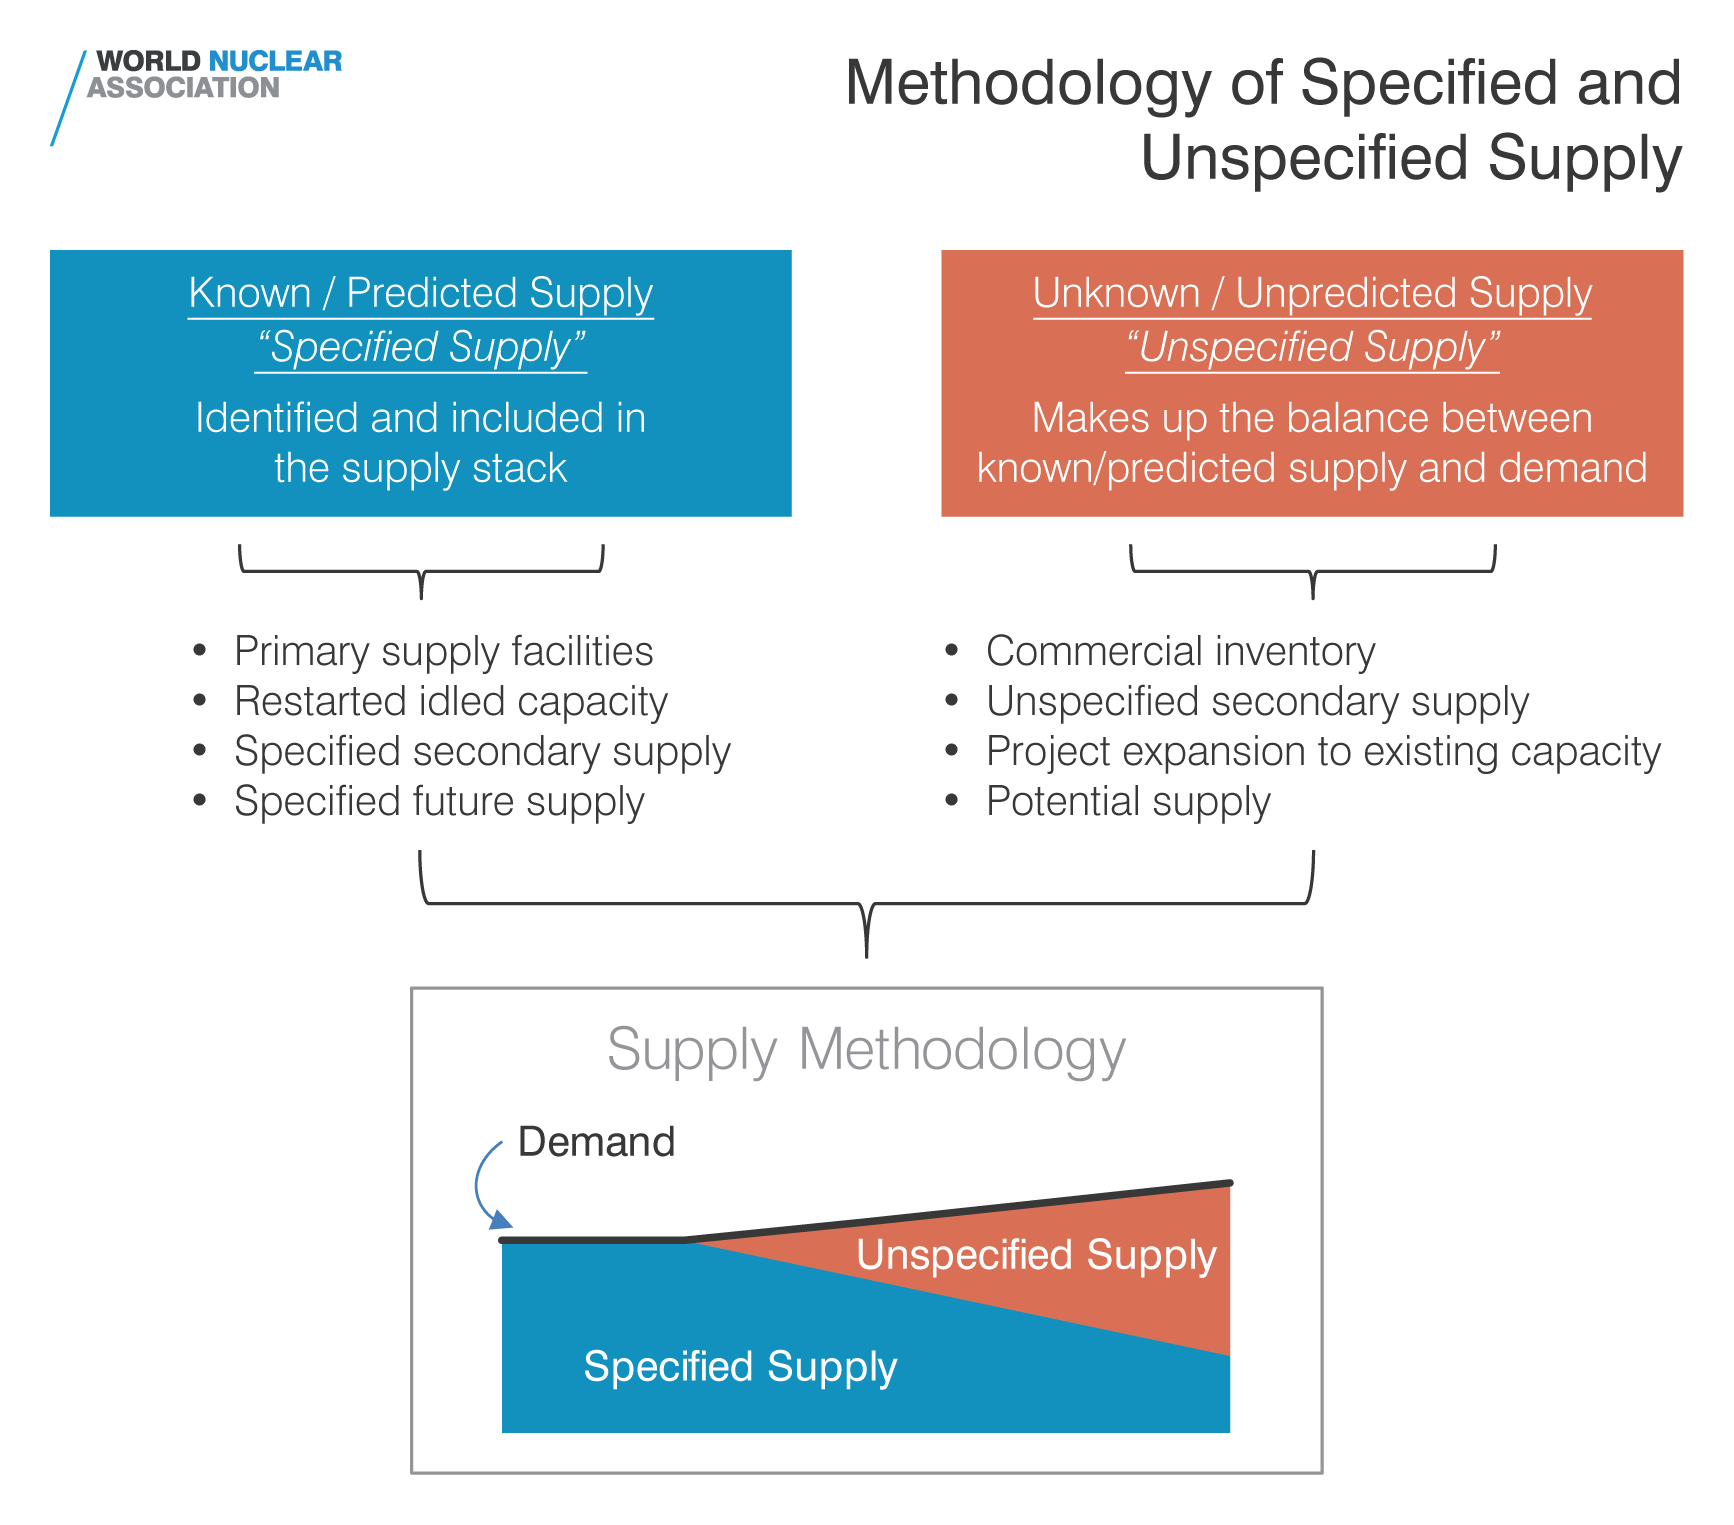 Methodology of specified and unspecified supplies